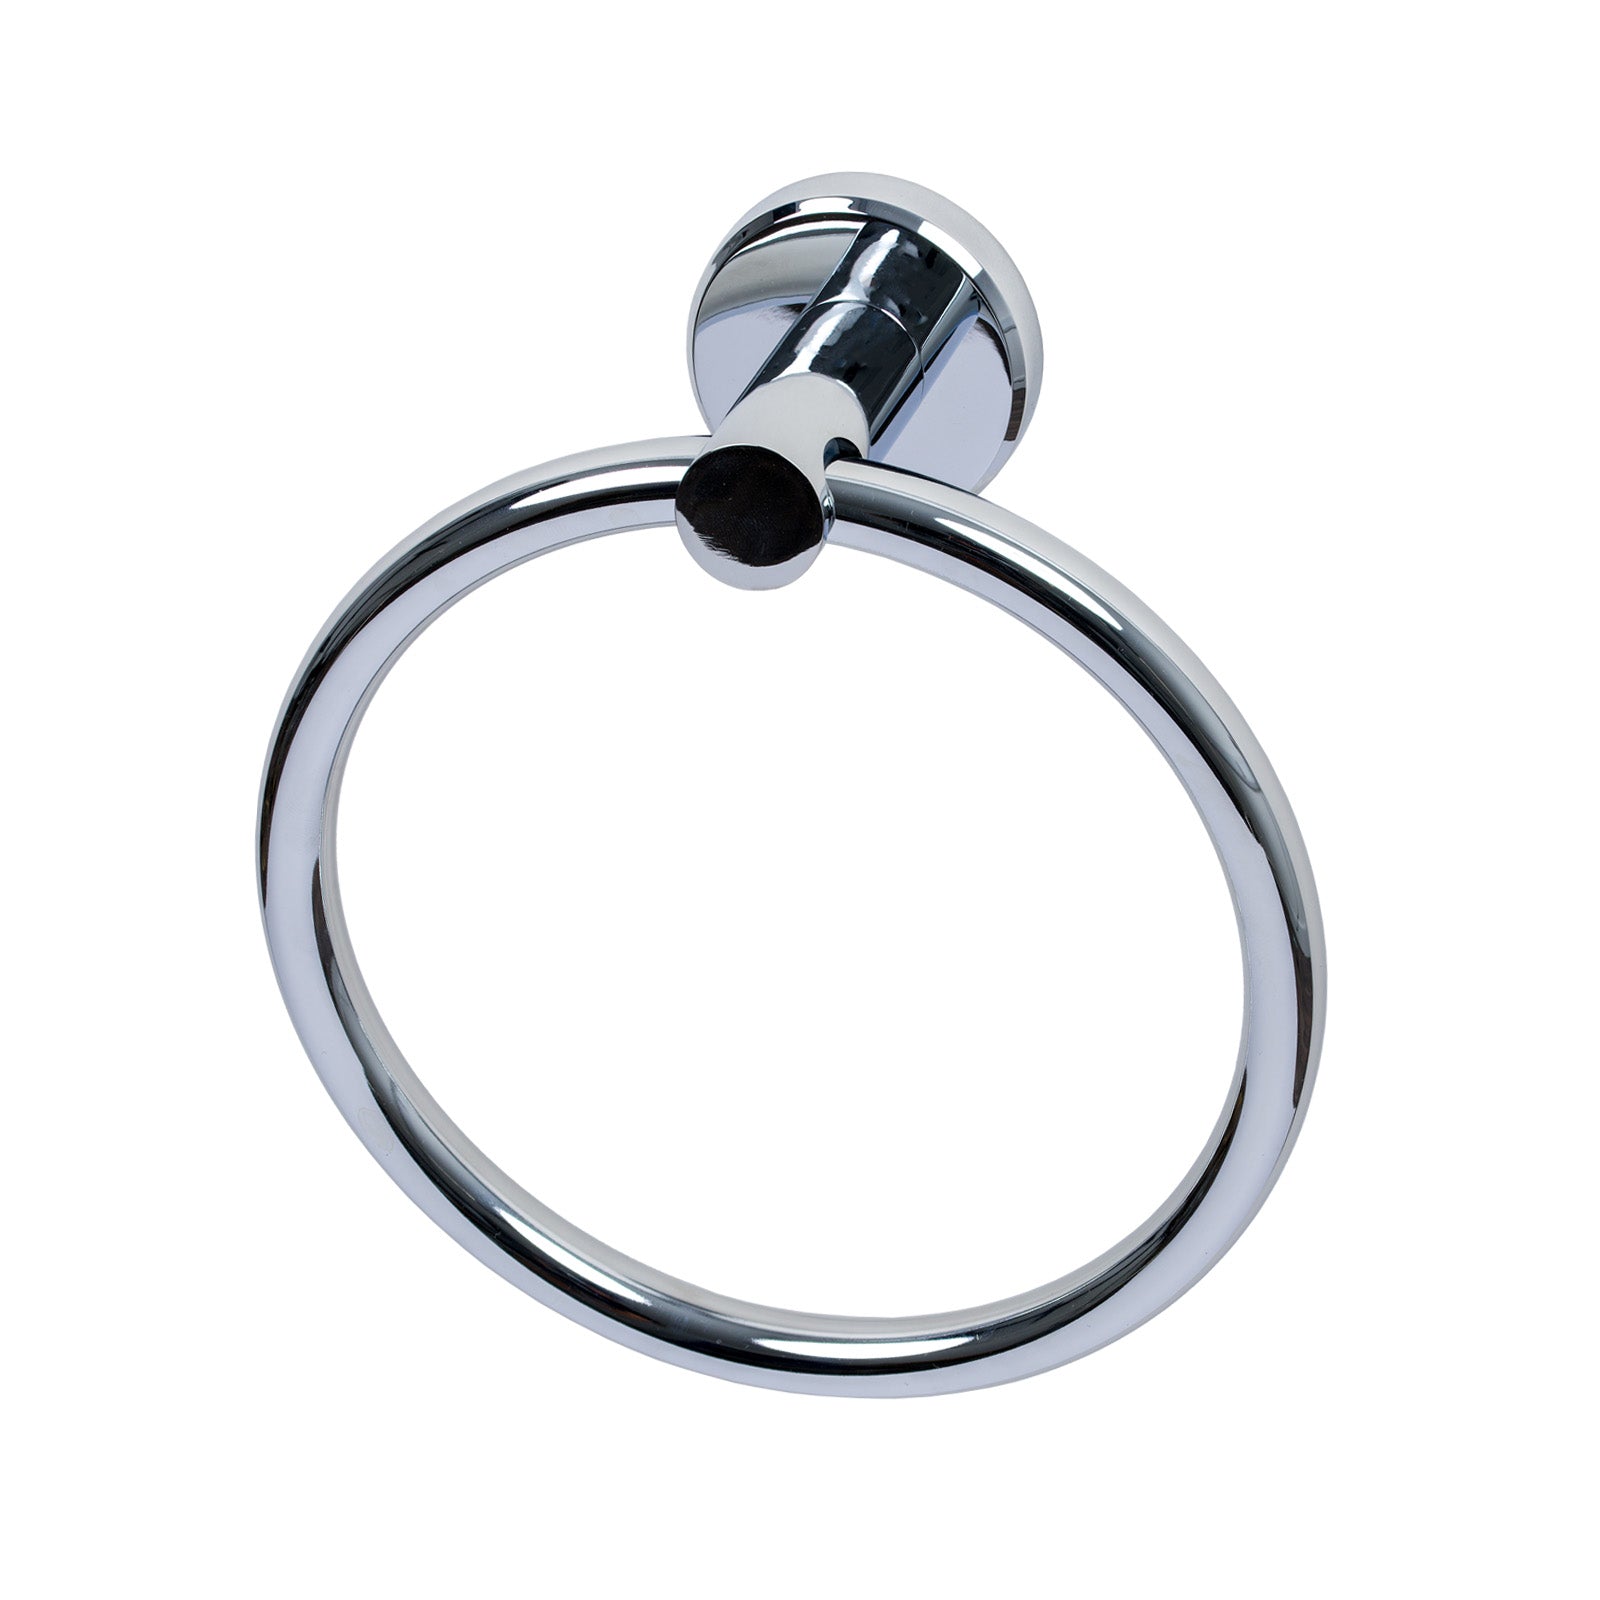 SHOW Image of Polished Chrome Oxford Towel Ring